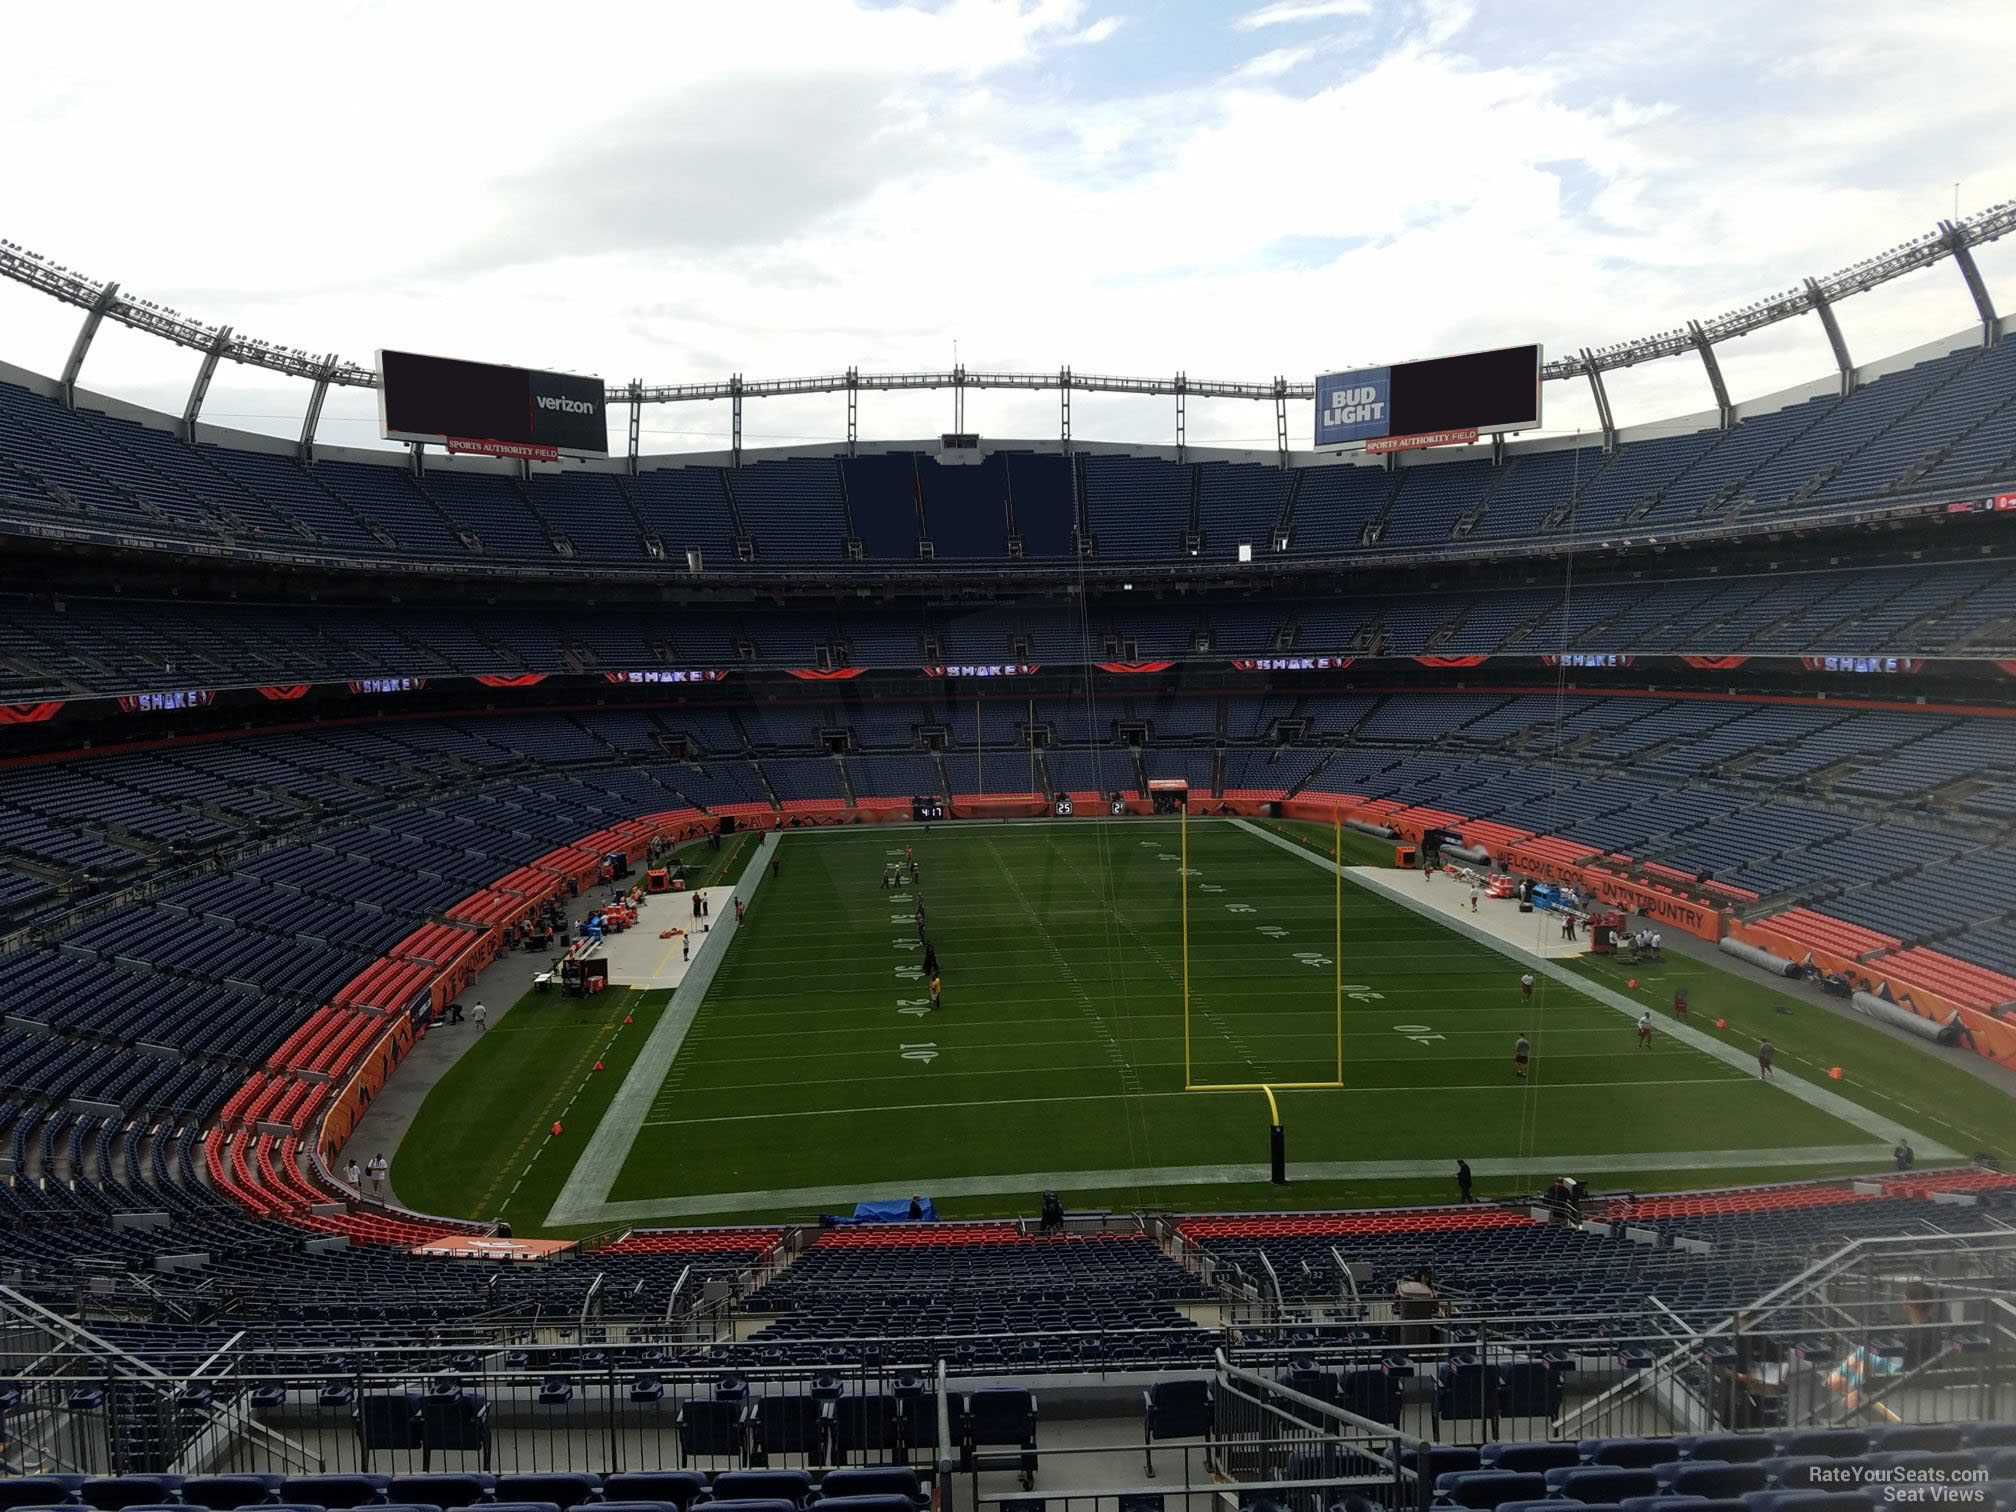 section 233, row 16 seat view  - empower field (at mile high)